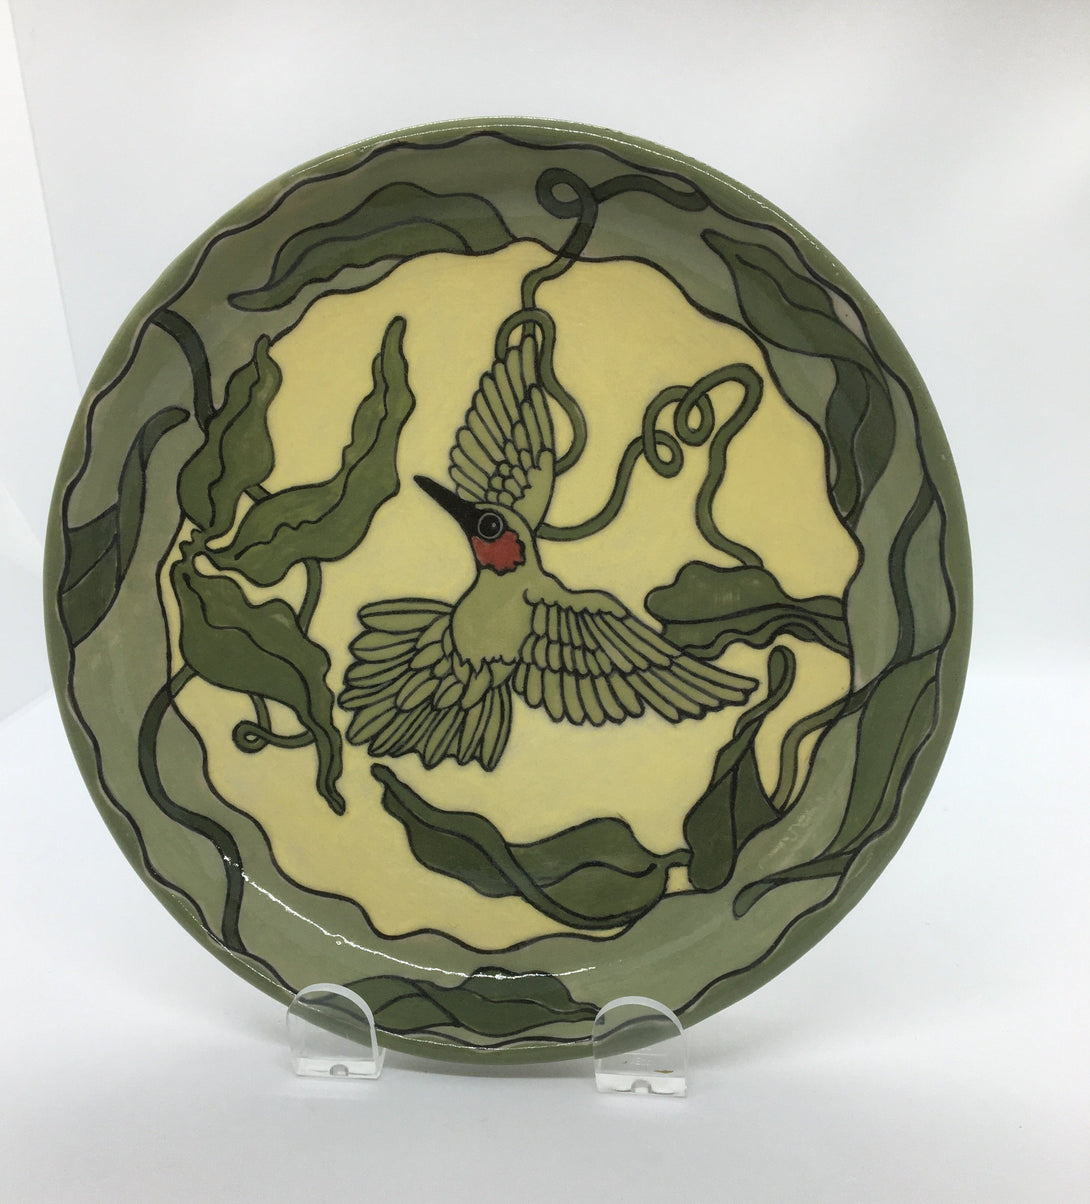 Nancy Gayou - Pottery - Green plate with hummingbird - Nancy Gayou - McMillan Arts Centre Gallery, Gift Shop and Box Office - Vancouver Island Art Gallery